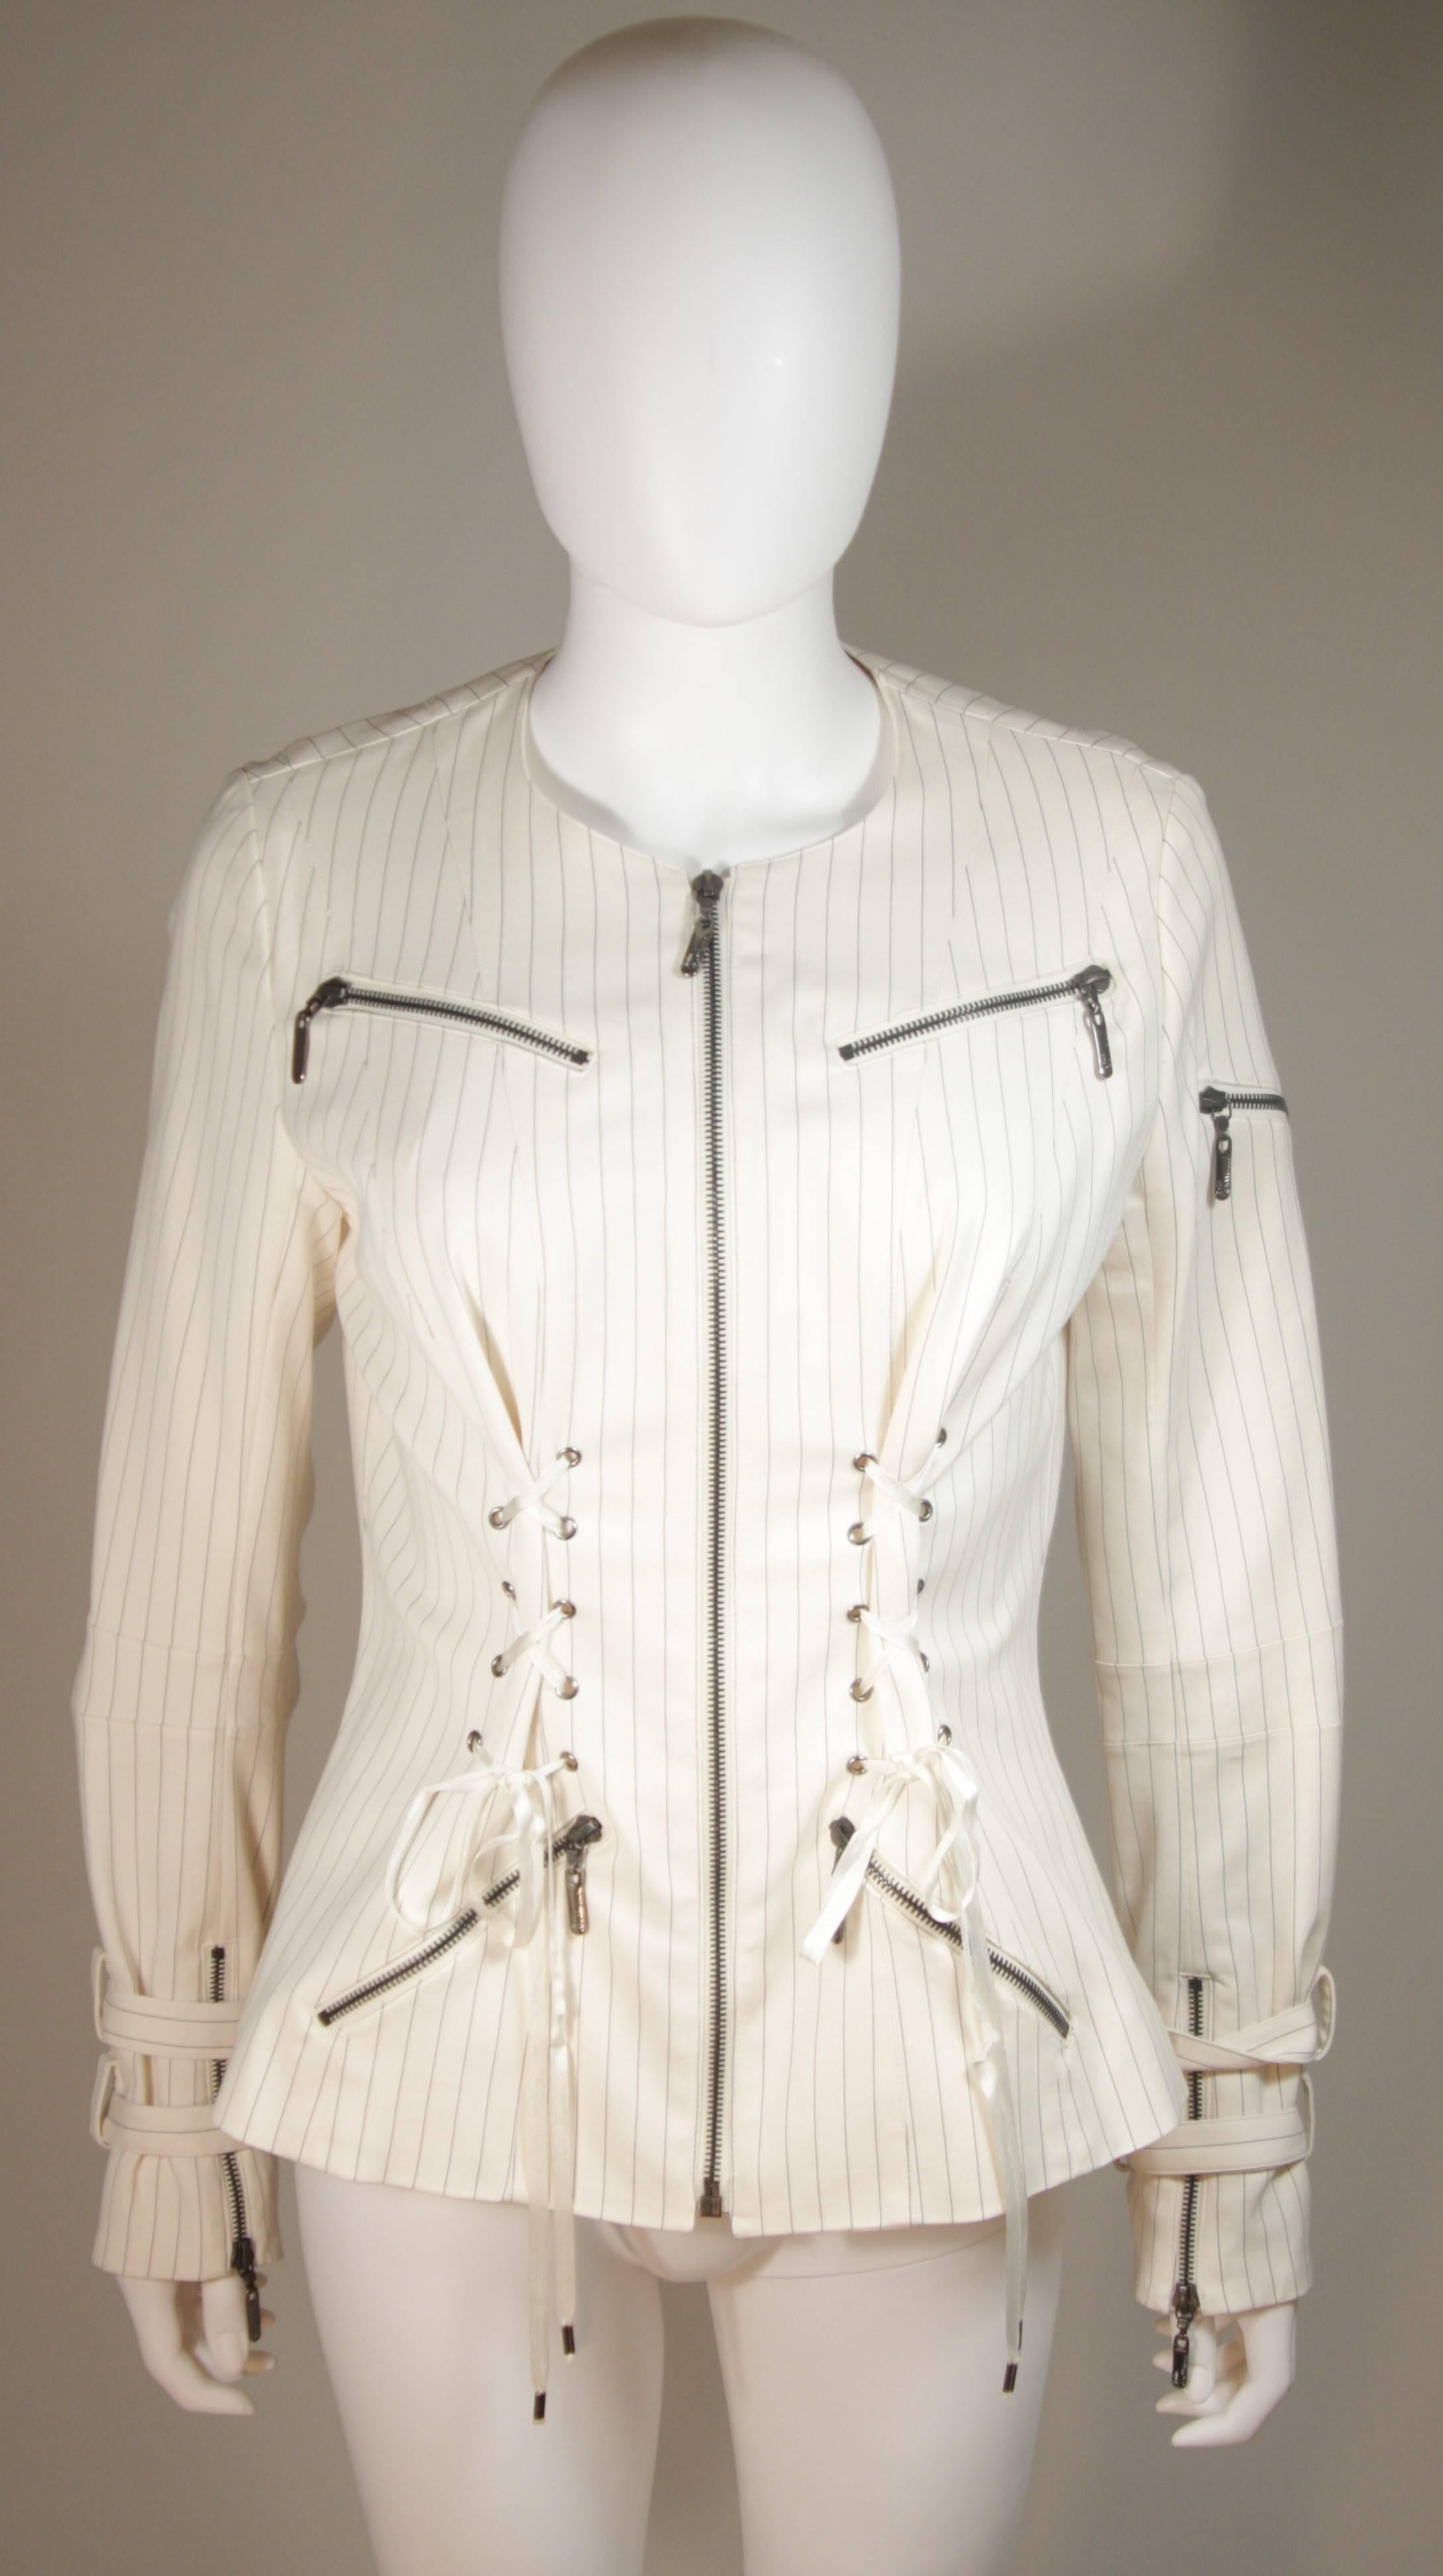 This John Galliano design is available for viewing at our Beverly Hills Boutique. We offer a large selection of evening gowns and luxury garments. 

 This jacket is composed of a cream and black pinstripe. Features zipper details with corseting at